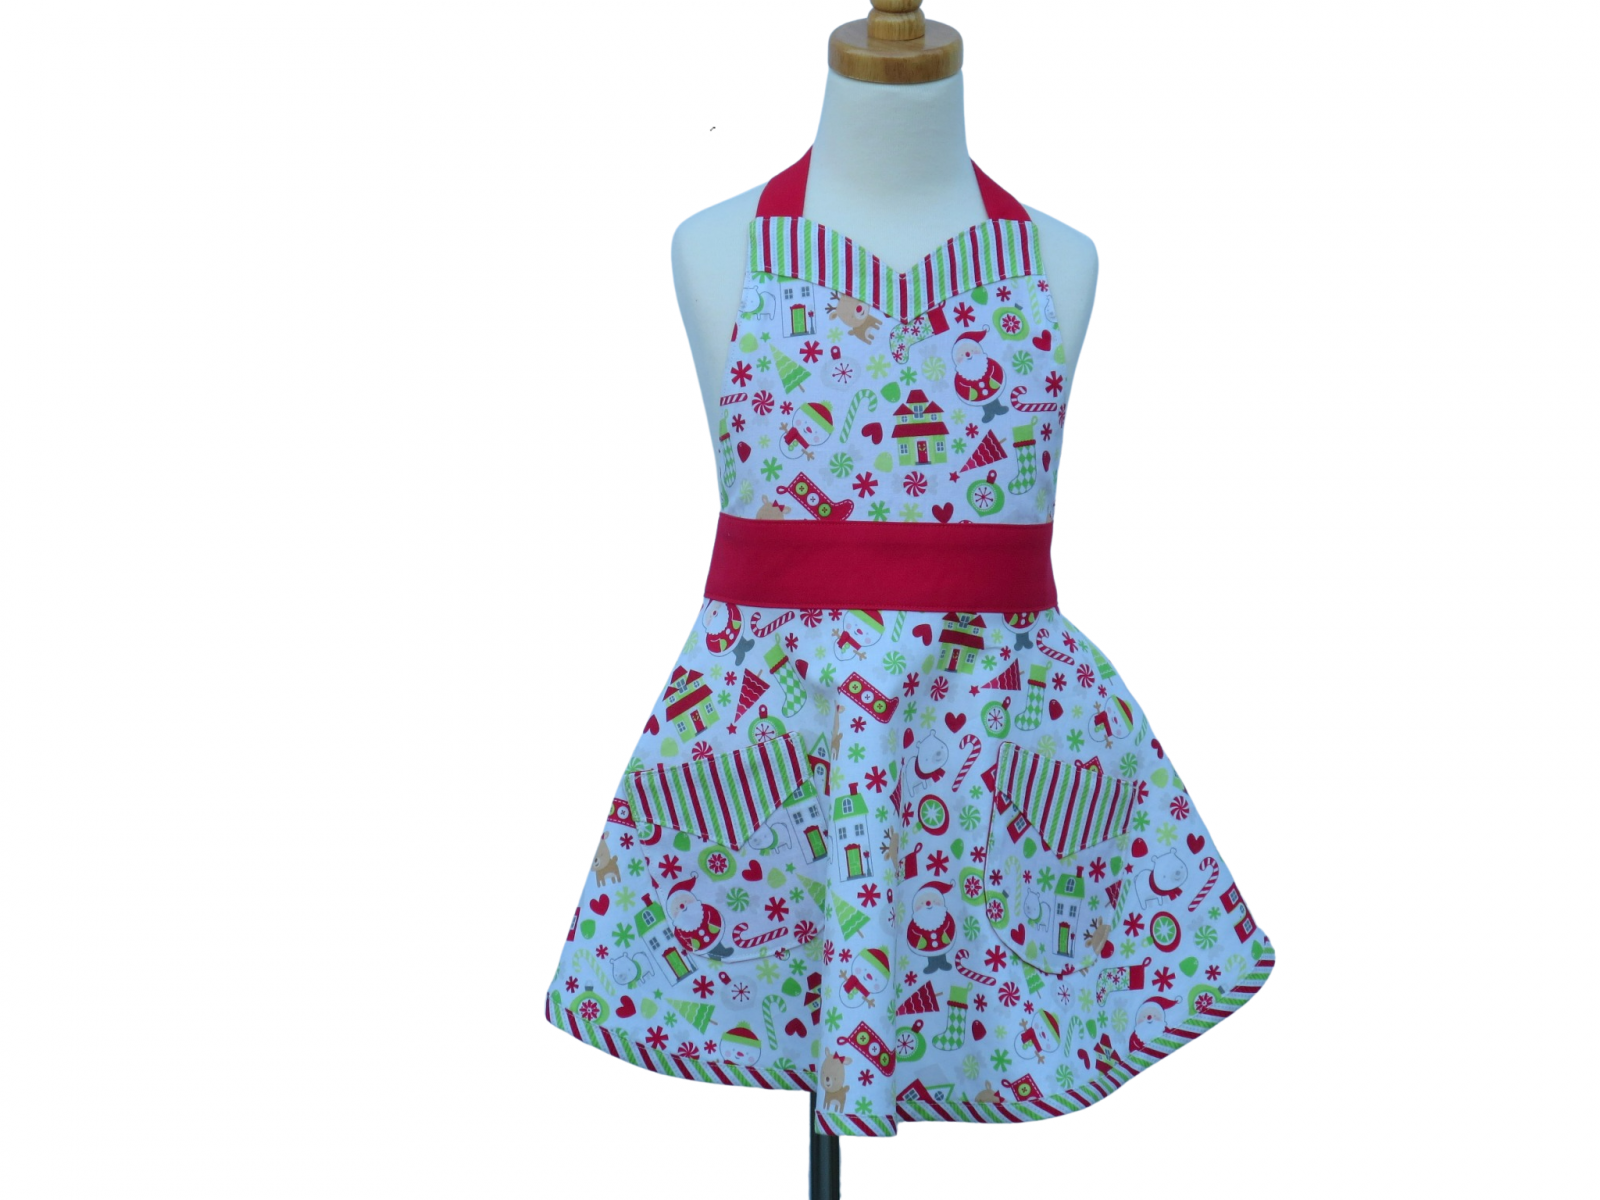 https://www.stitchedbybeverly.com/sites/stitchedbybeverly.indiemade.com/files/imagecache/im_clientsite_product_zoom/girls_retro_style_christmas_apron_front_view_tied_in_back.jpg